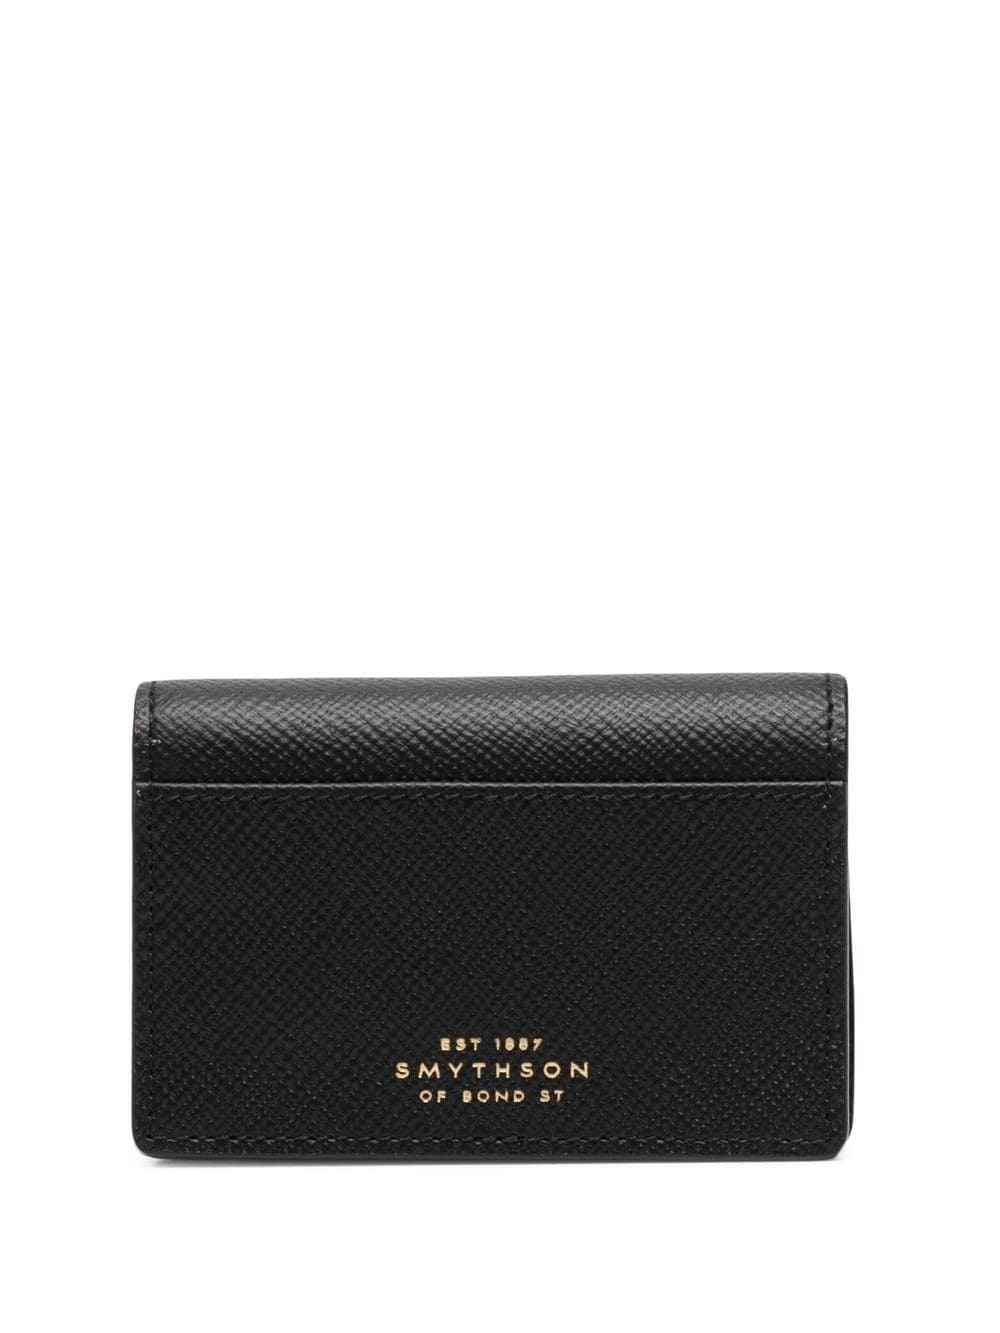 leather foldover wallet - 1